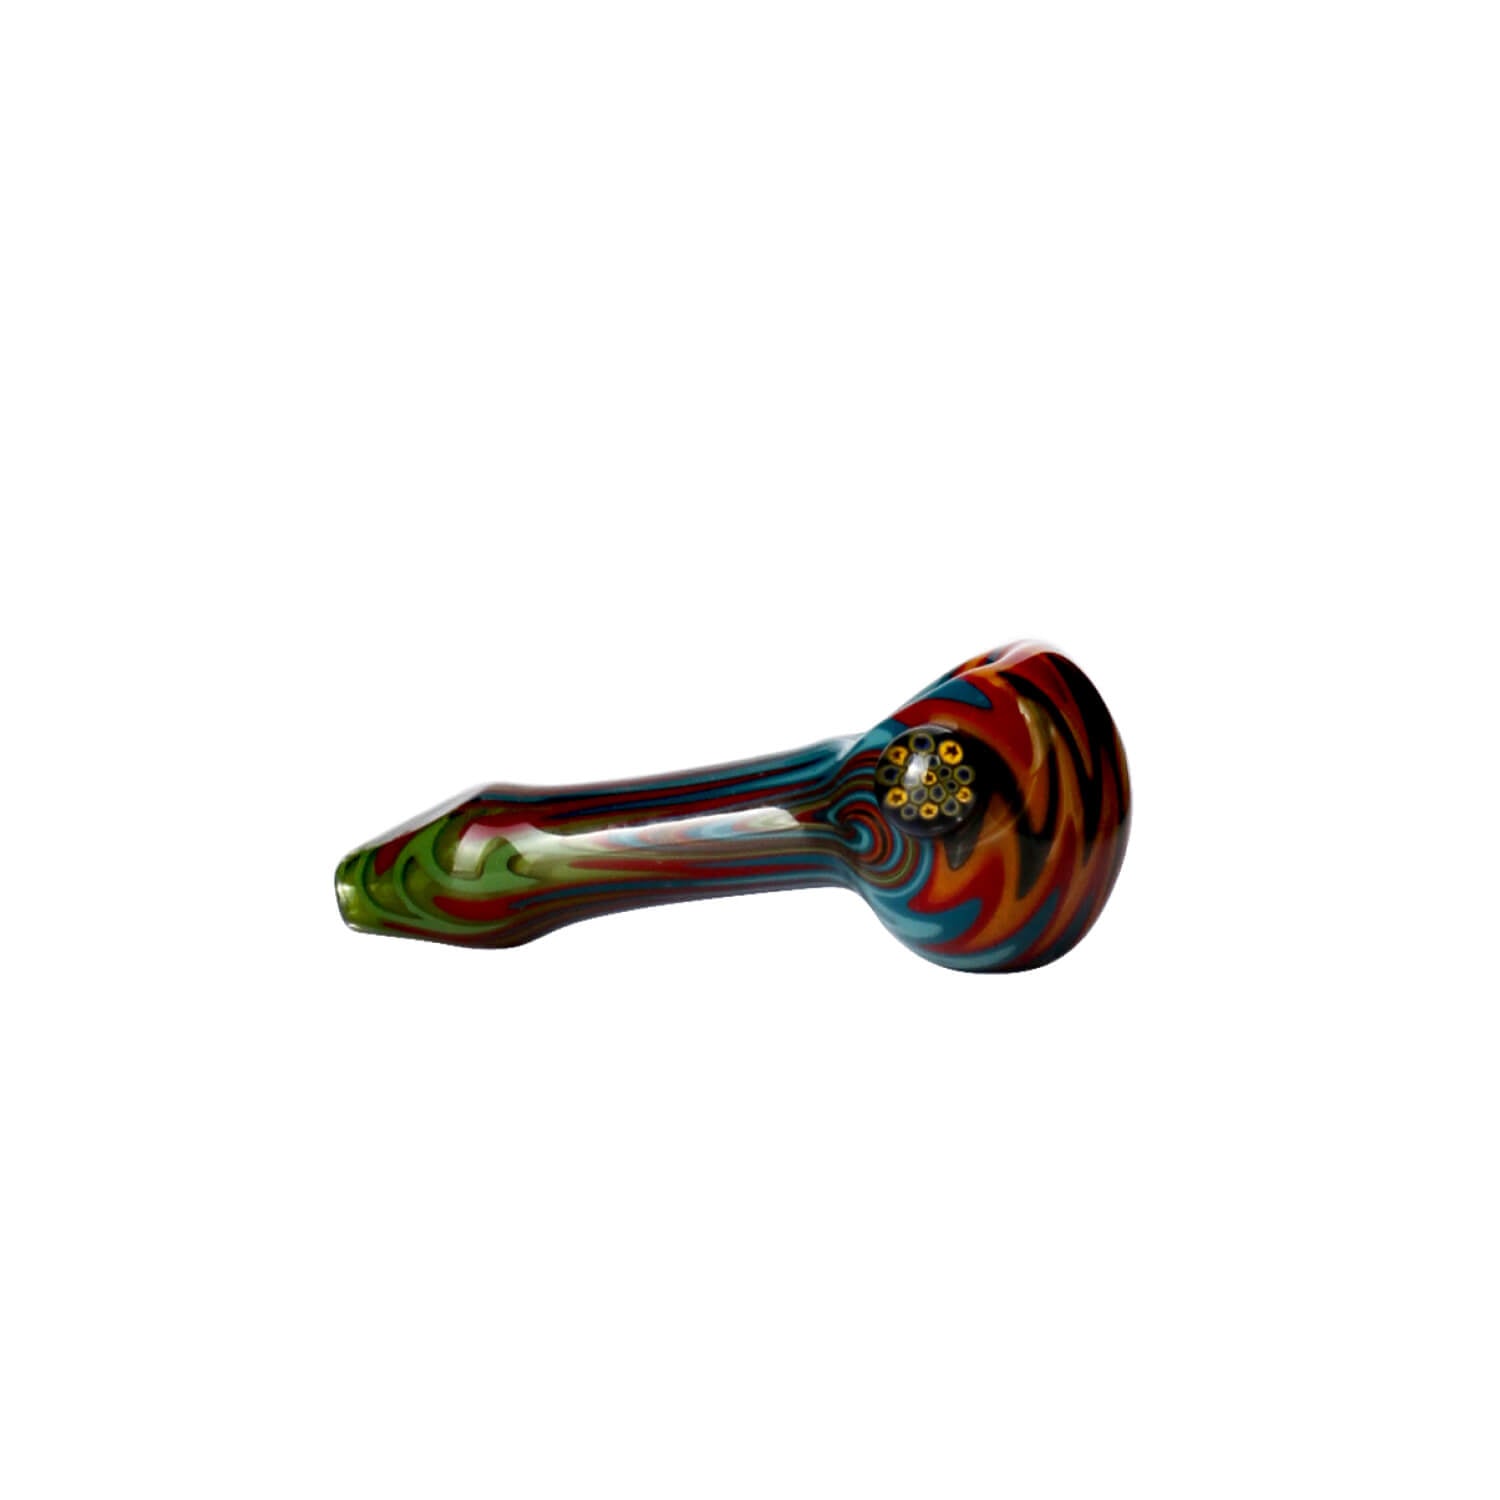 Reversed Spoon Pipe - Weed Pipes - Molino Glass Bongs